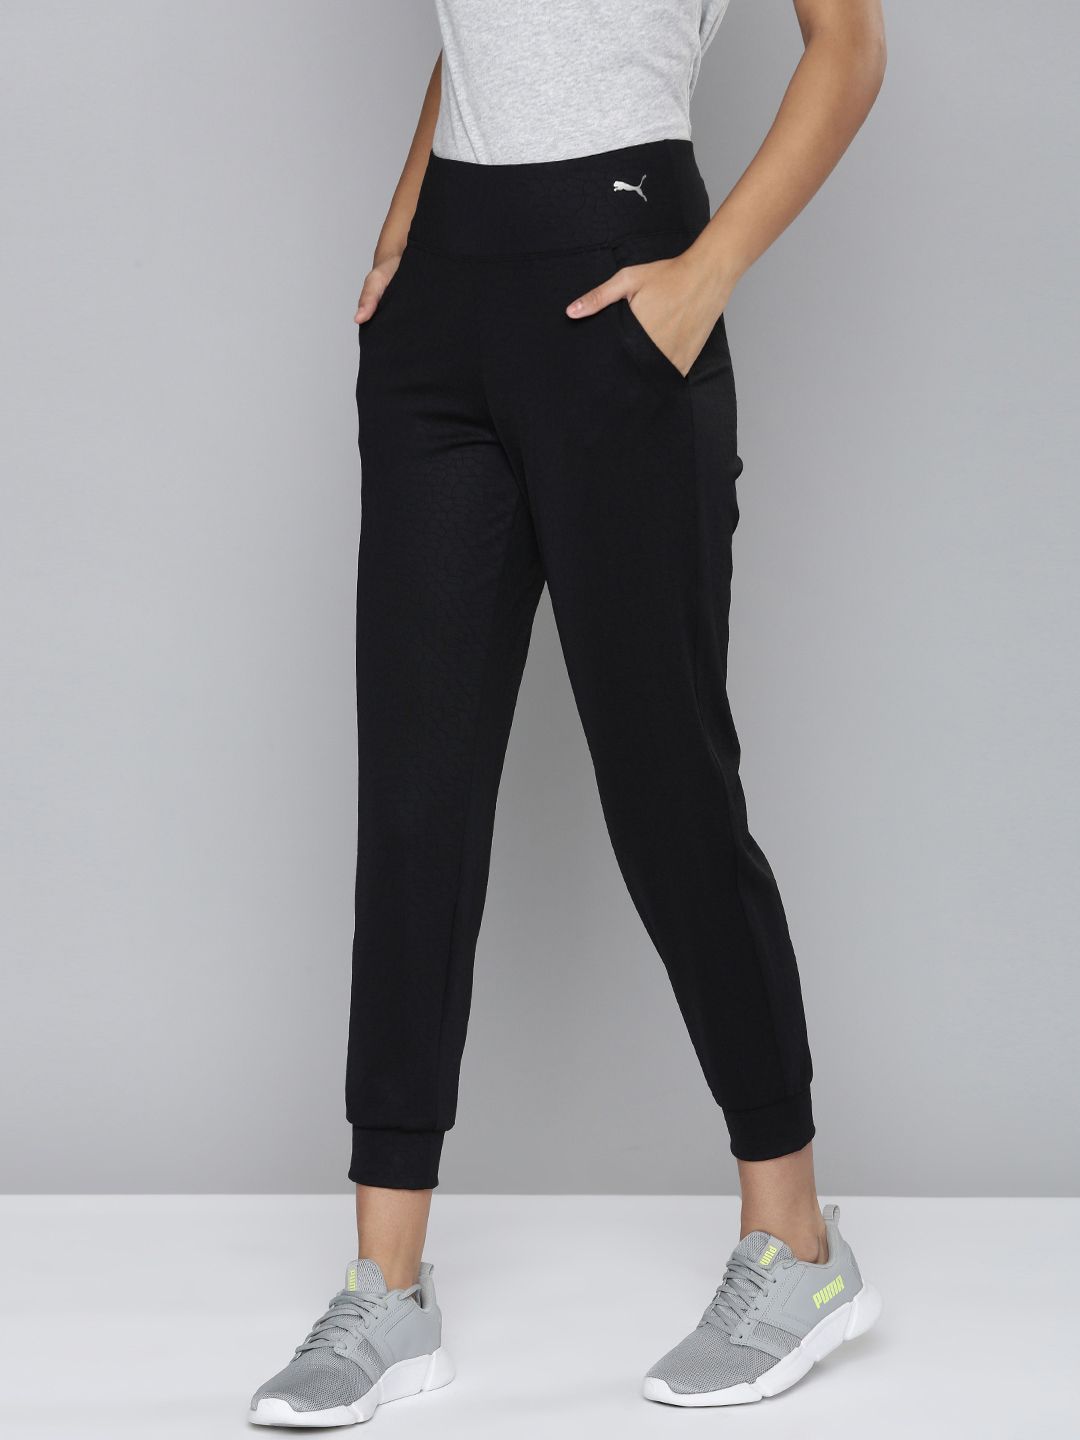 Puma Women Black Solid Slim Fit DryCell Flawless Jogger Price in India